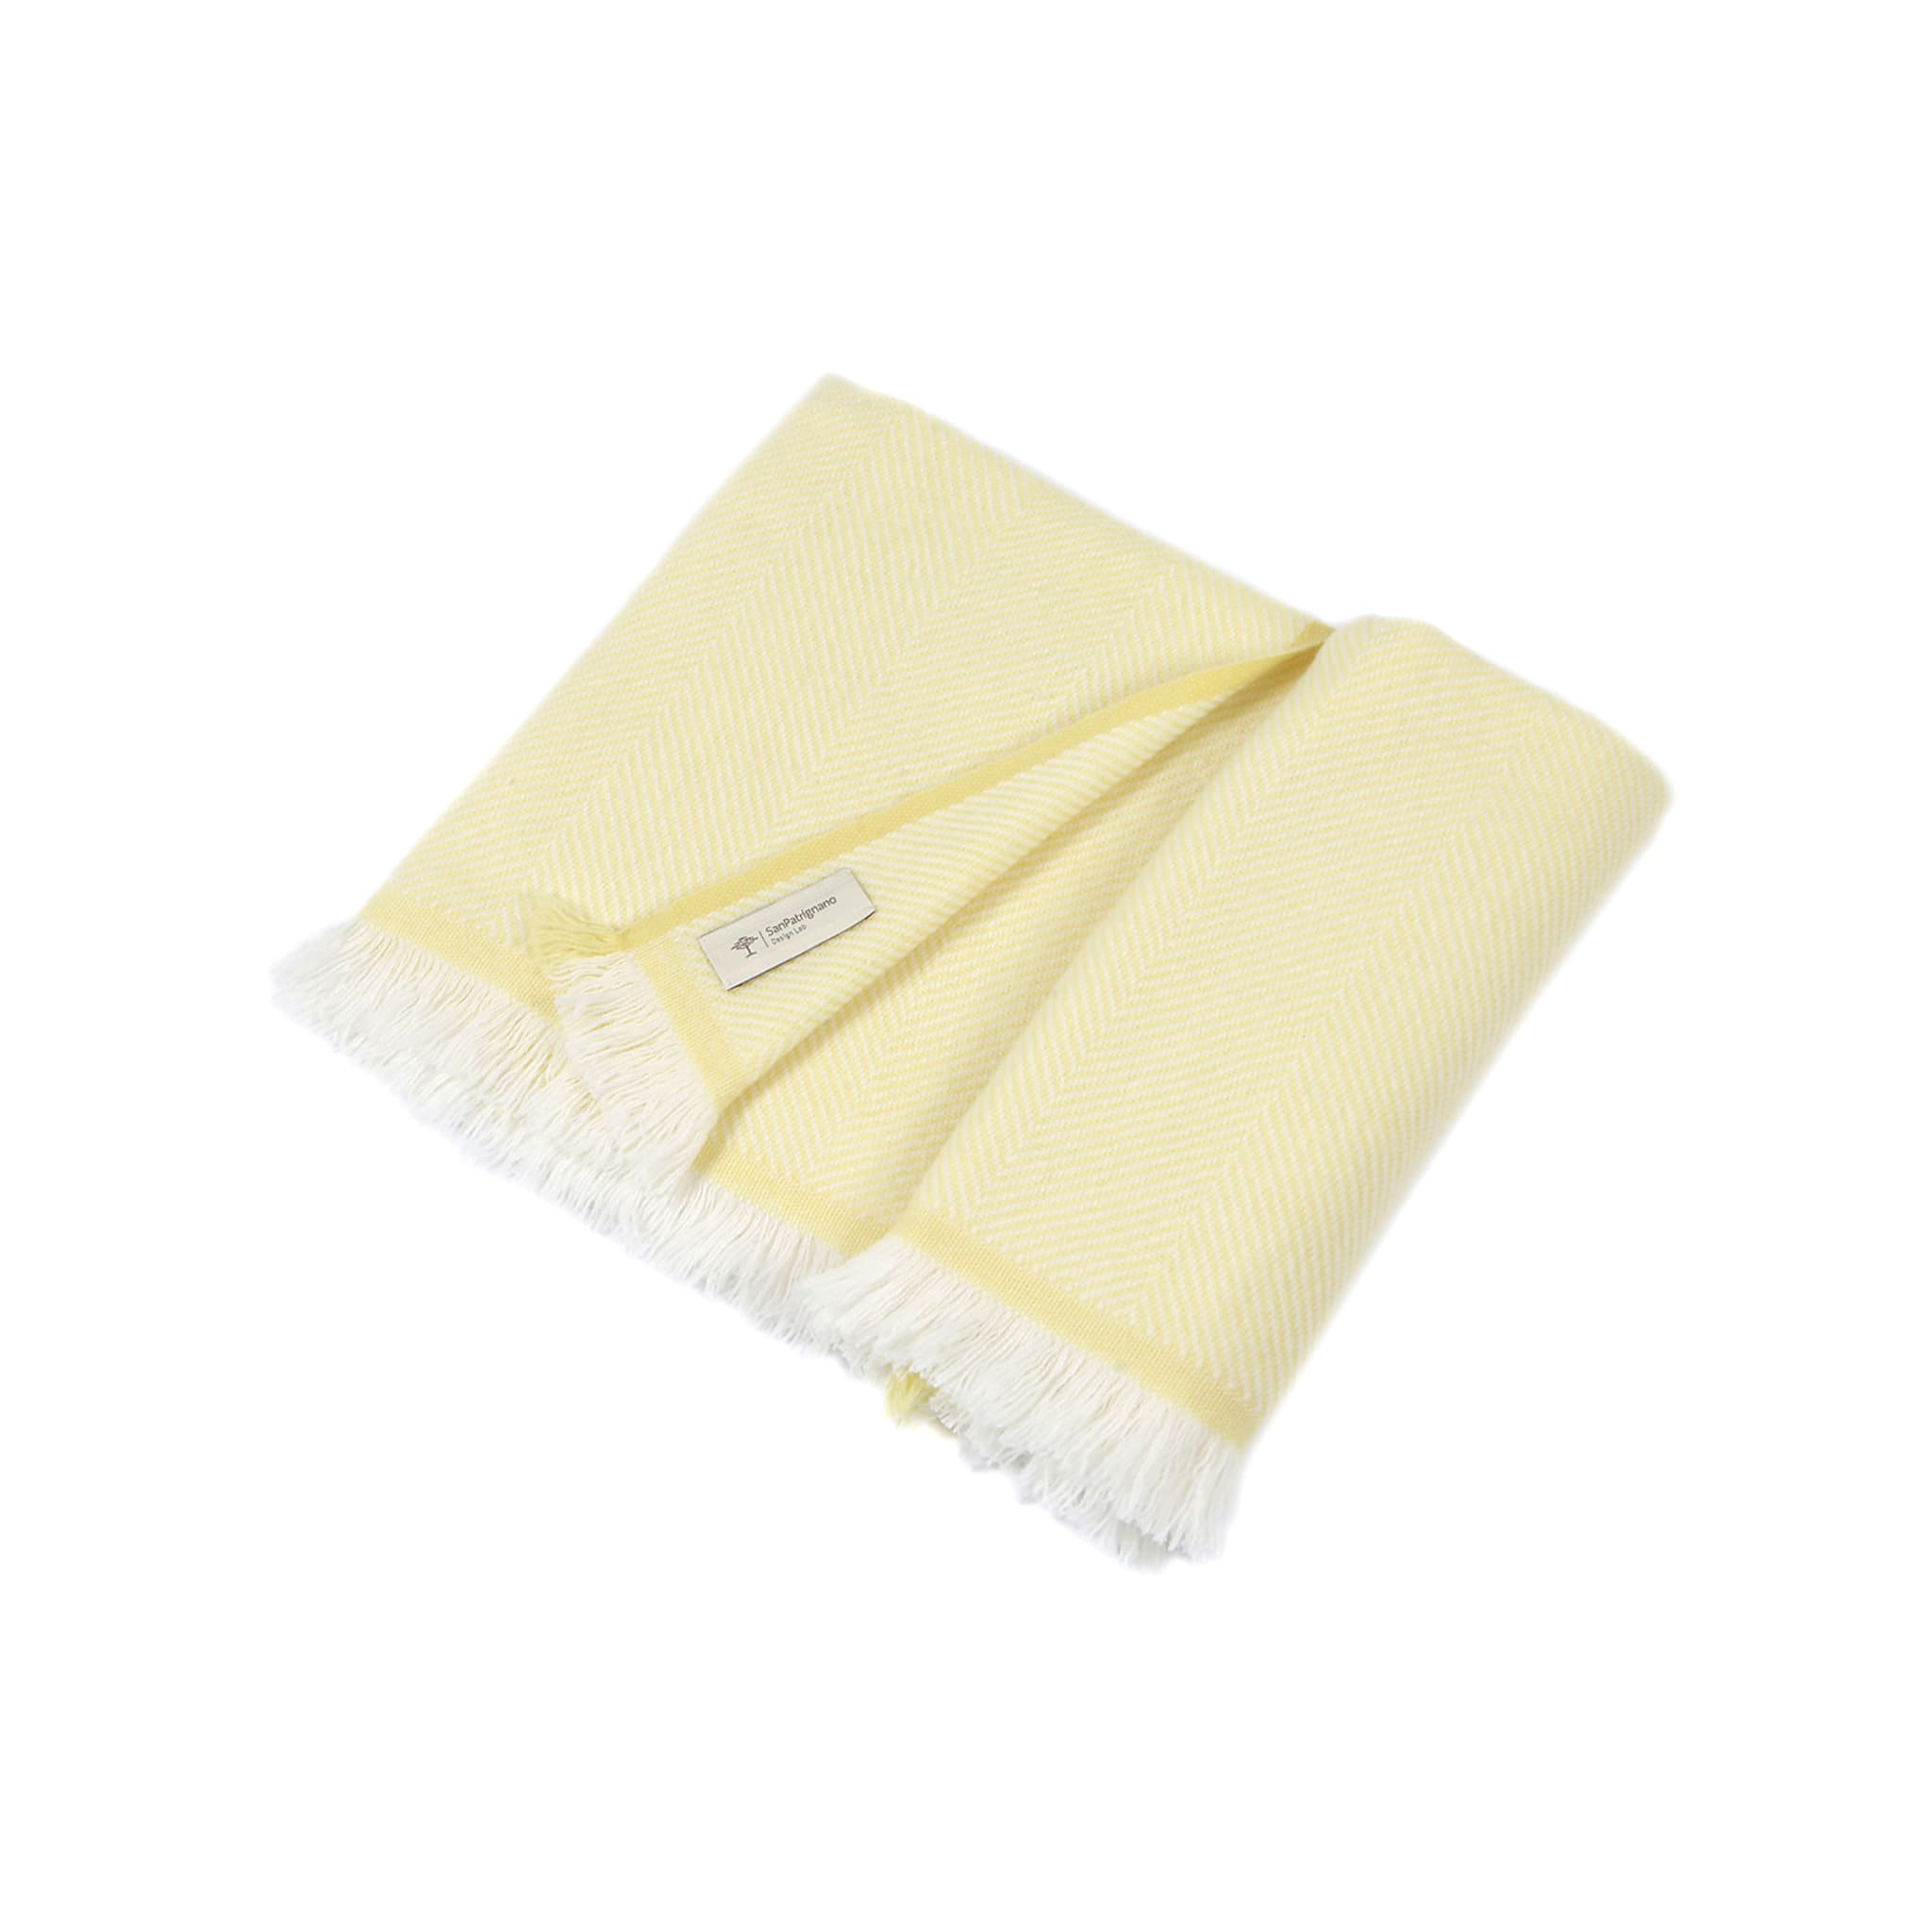 Cream and Lemon Yellow 100% Cashmere Baby Blanket with short fringes - Main view